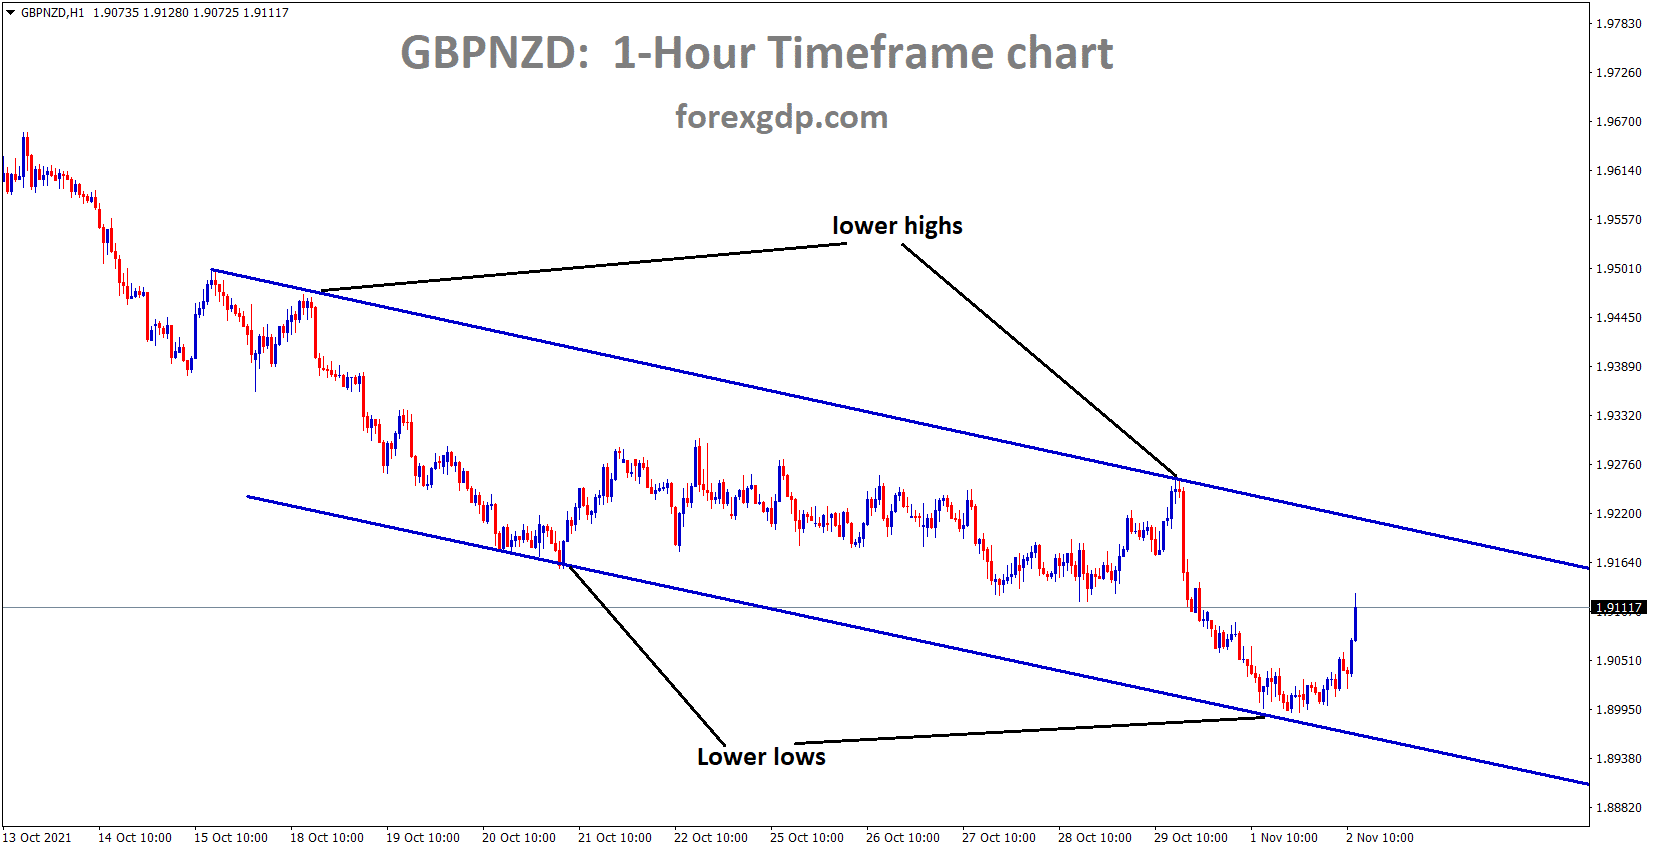 GBPNZD is moving in the Descending channel and the market rebounded from the lower low area.